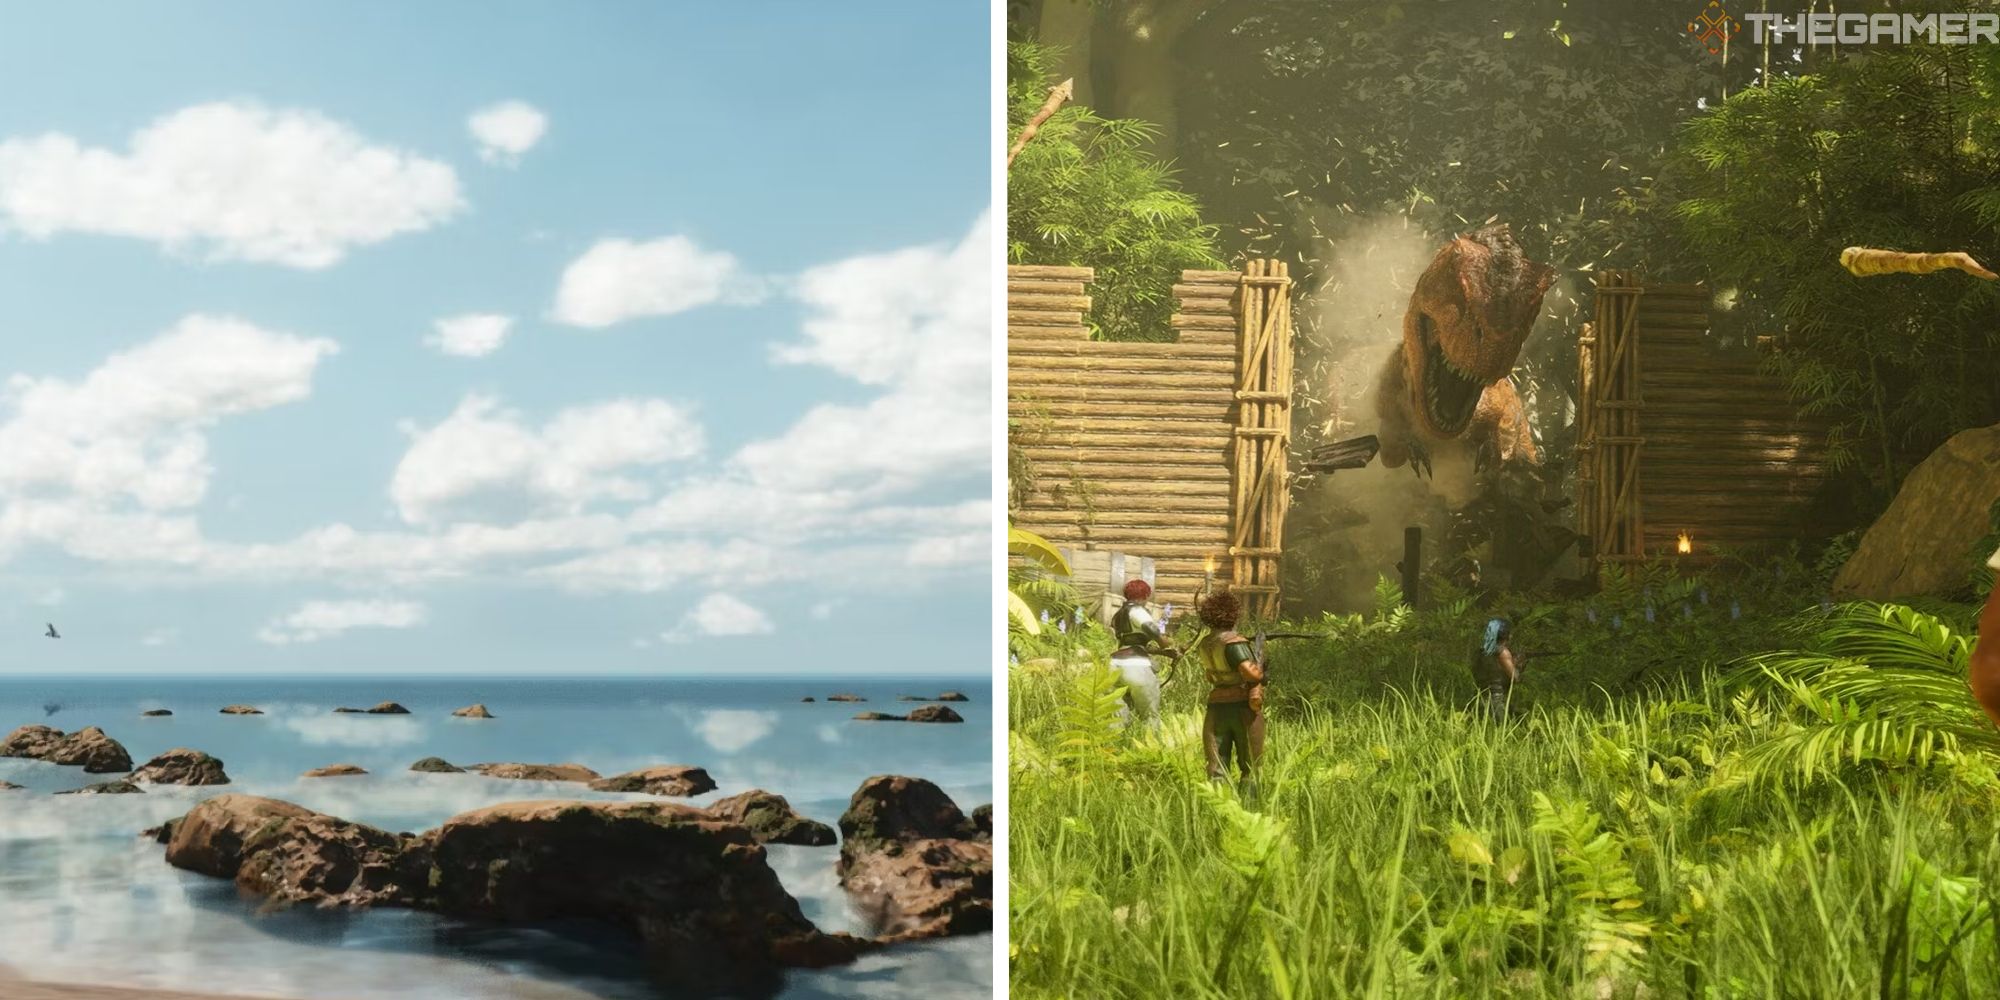 split image showing ocean during day next to image of players fighting a t rex